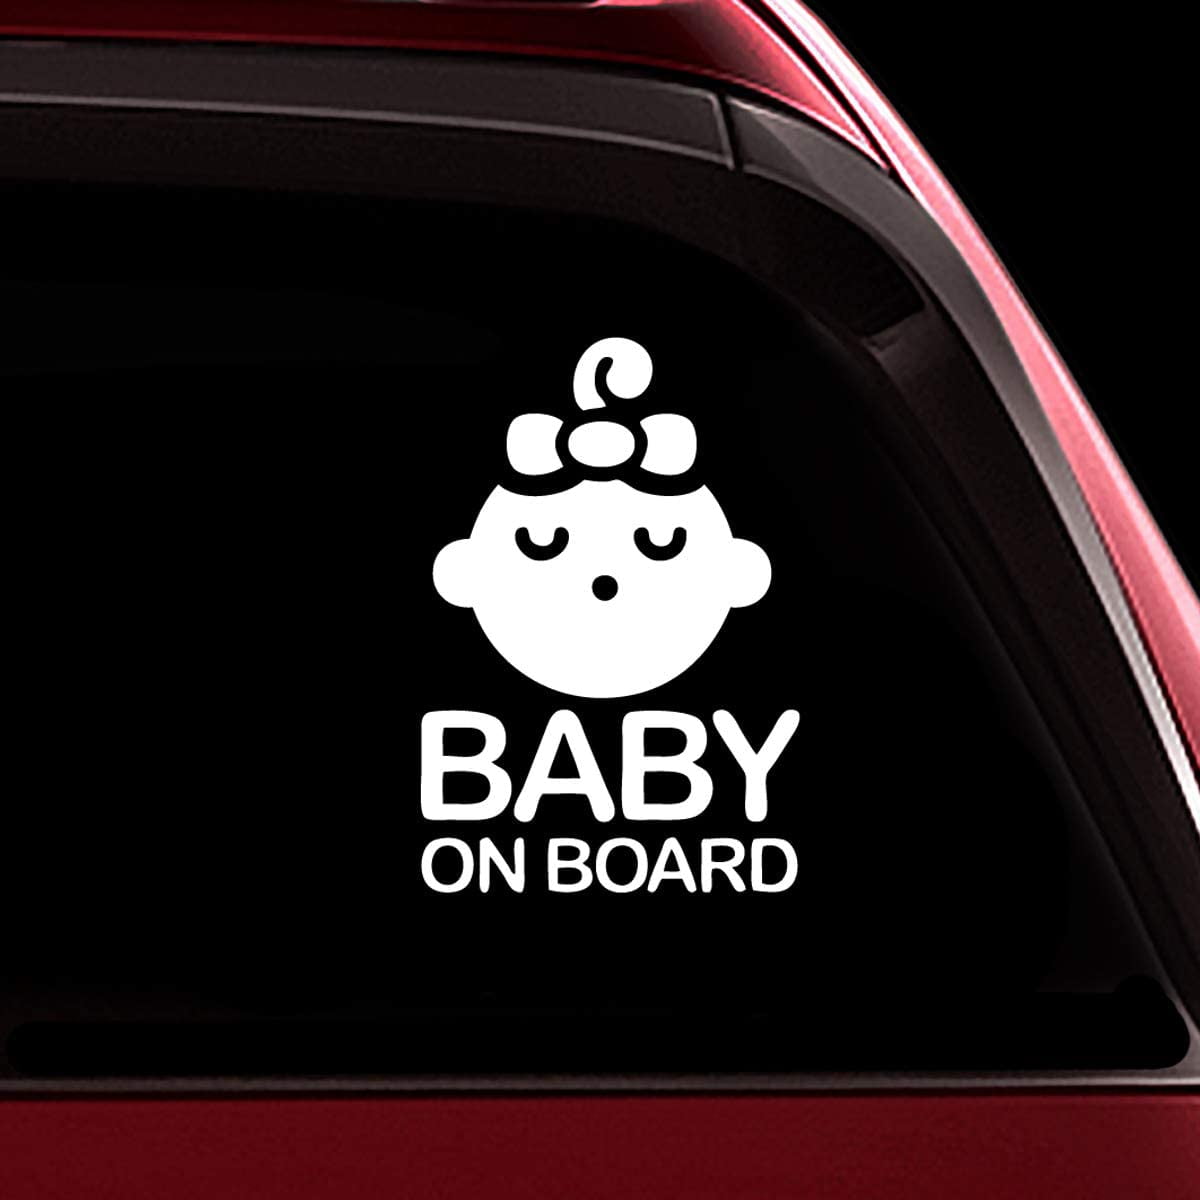 Dont Even Think of Messing with This Driver Car Sign Baby on Board Style Suction Cup Sign Anti Tailgate Anti Road Rage Vehicle Sign 